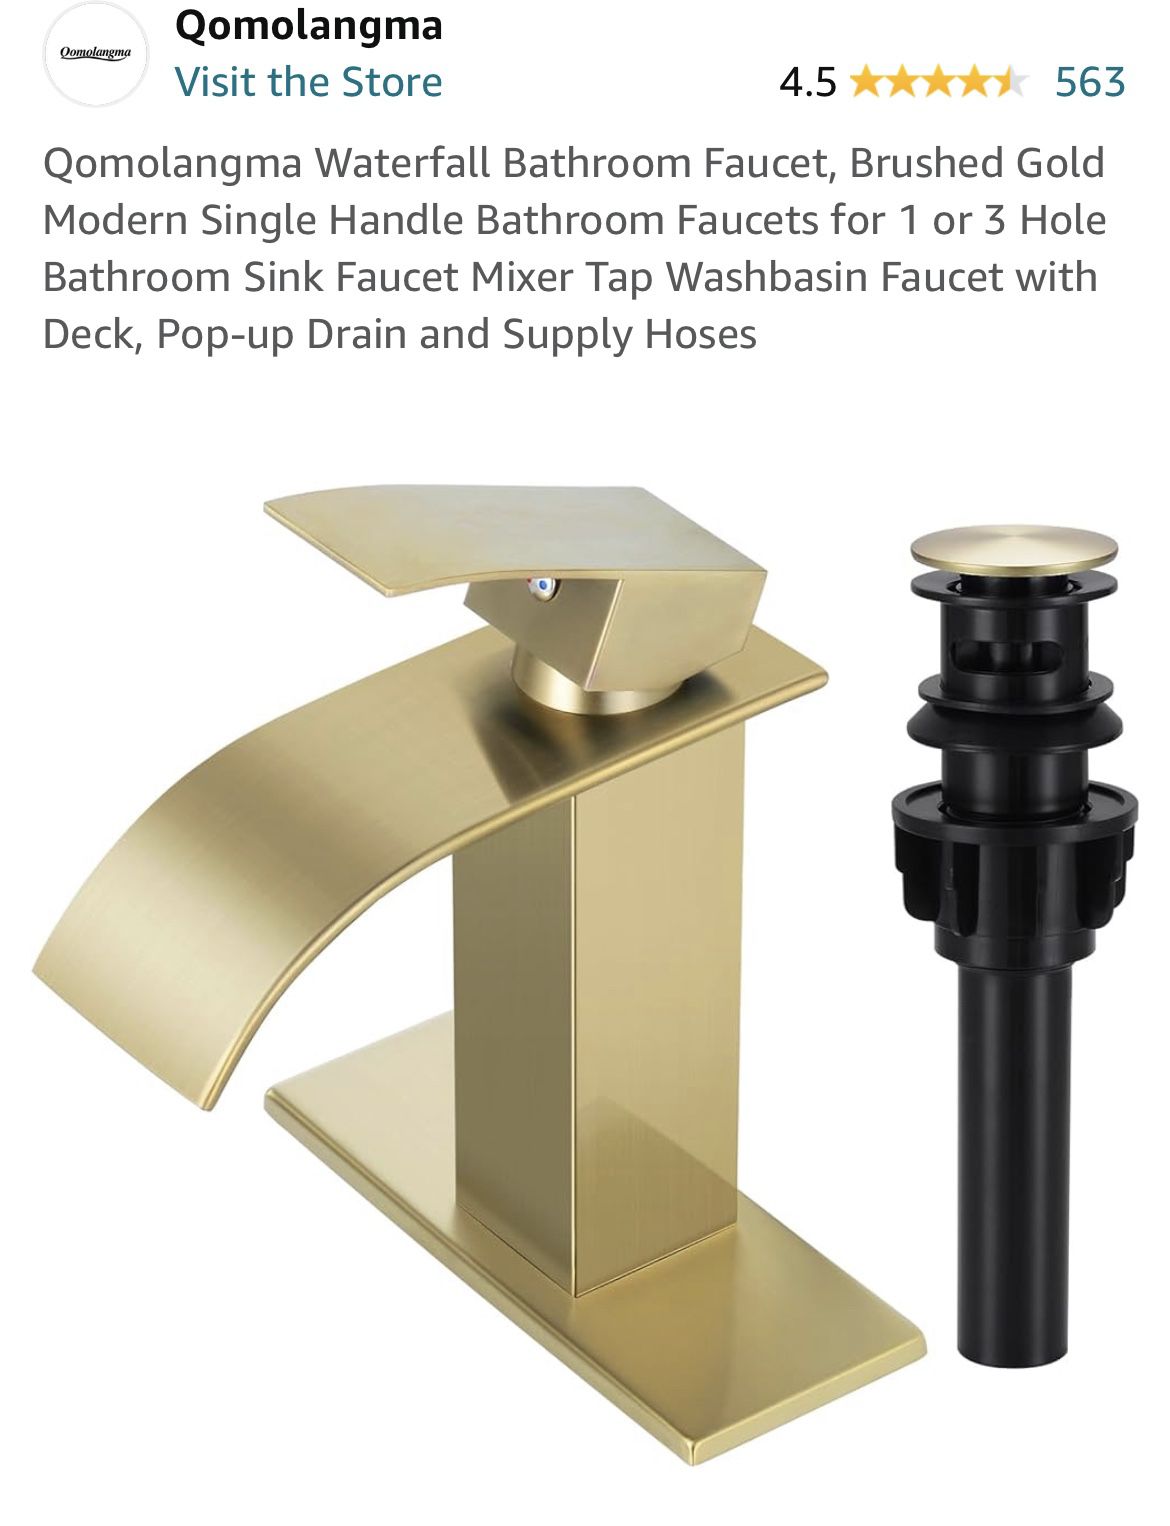 Qomolangma Waterfall Bathroom Faucet, Brushed Gold Modern Single Handle Bathroom Faucets for 1 or 3 Hole Bathroom Sink Faucet Mixer Tap Washbasin Fauc